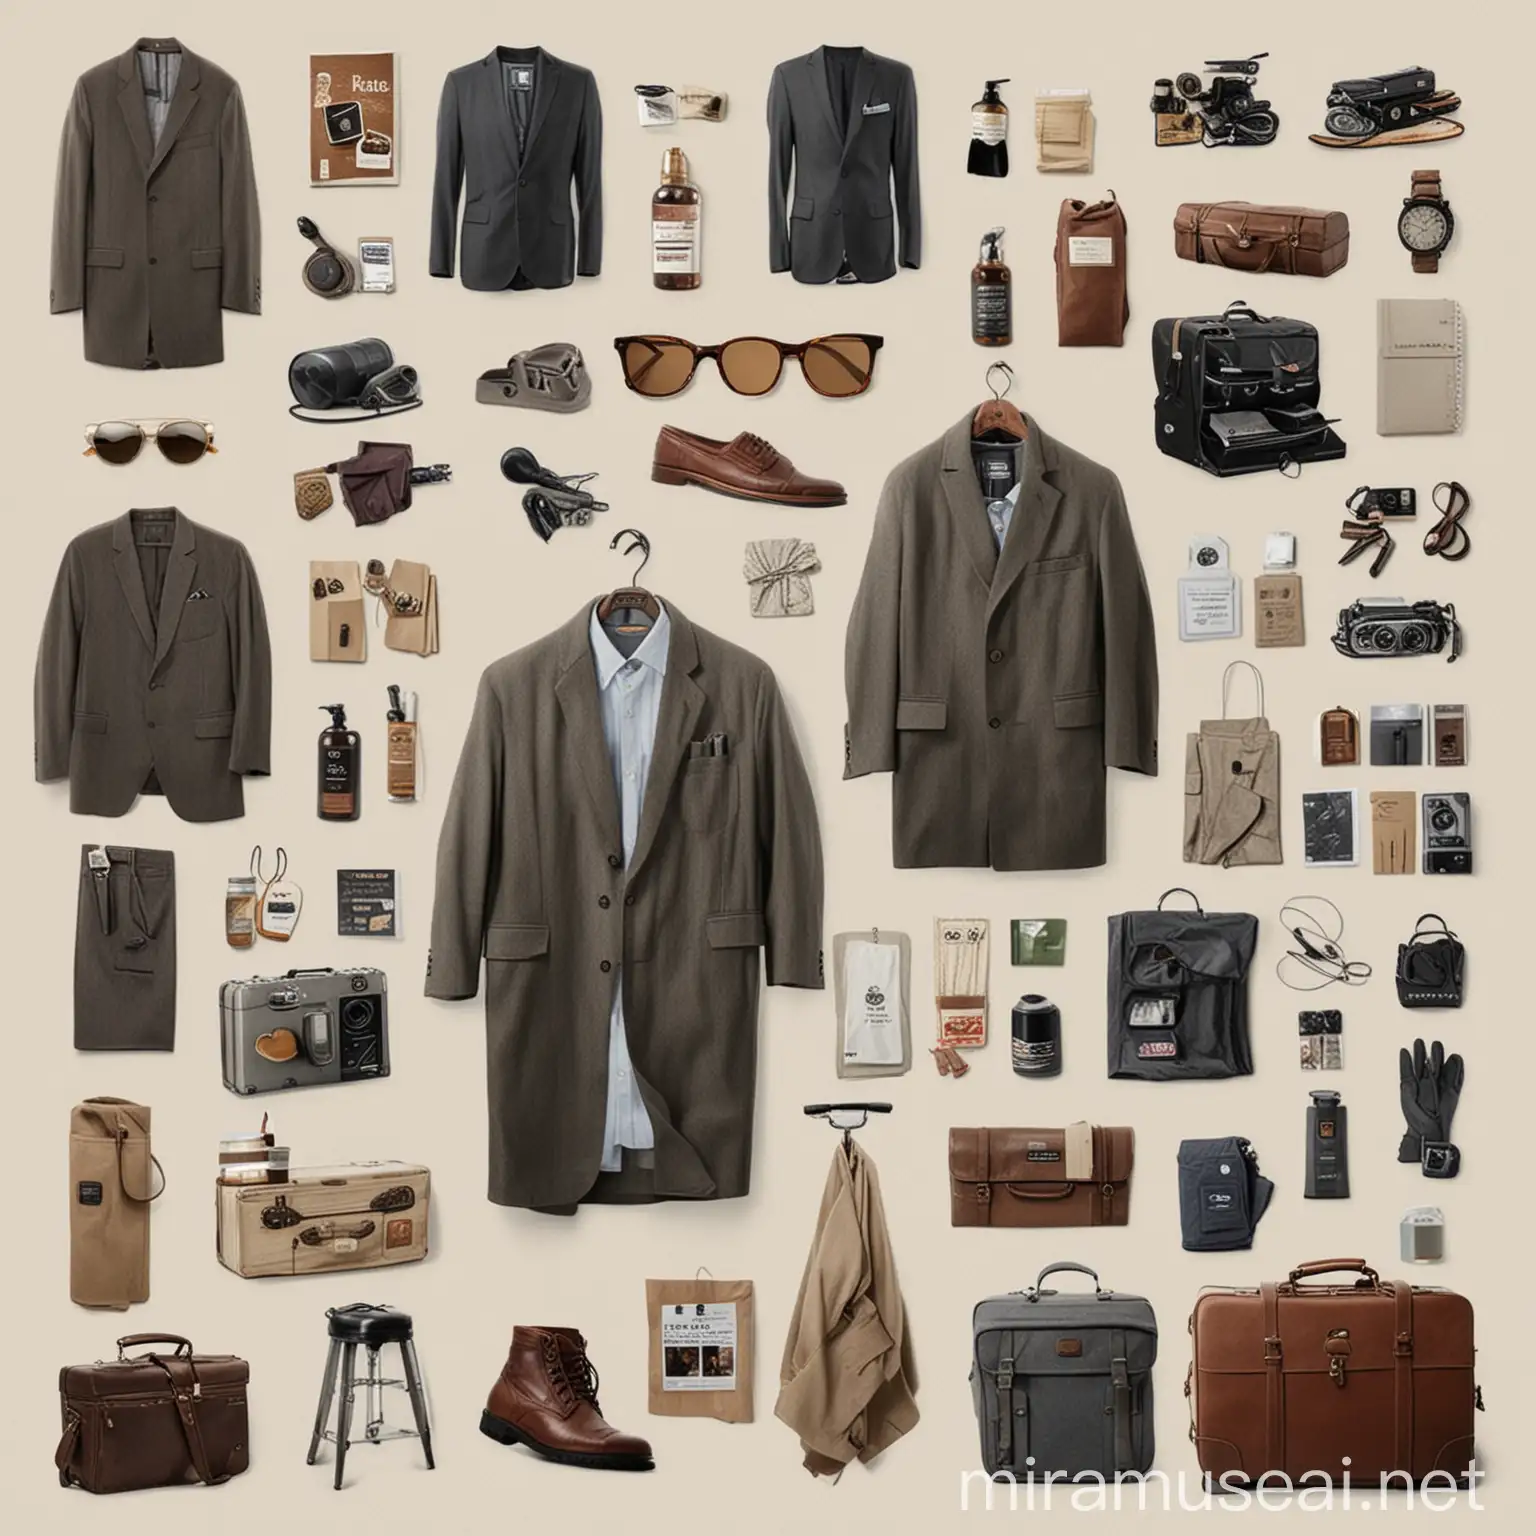 MiddleAged Men with Luggage and Office Supplies in Travel Environment